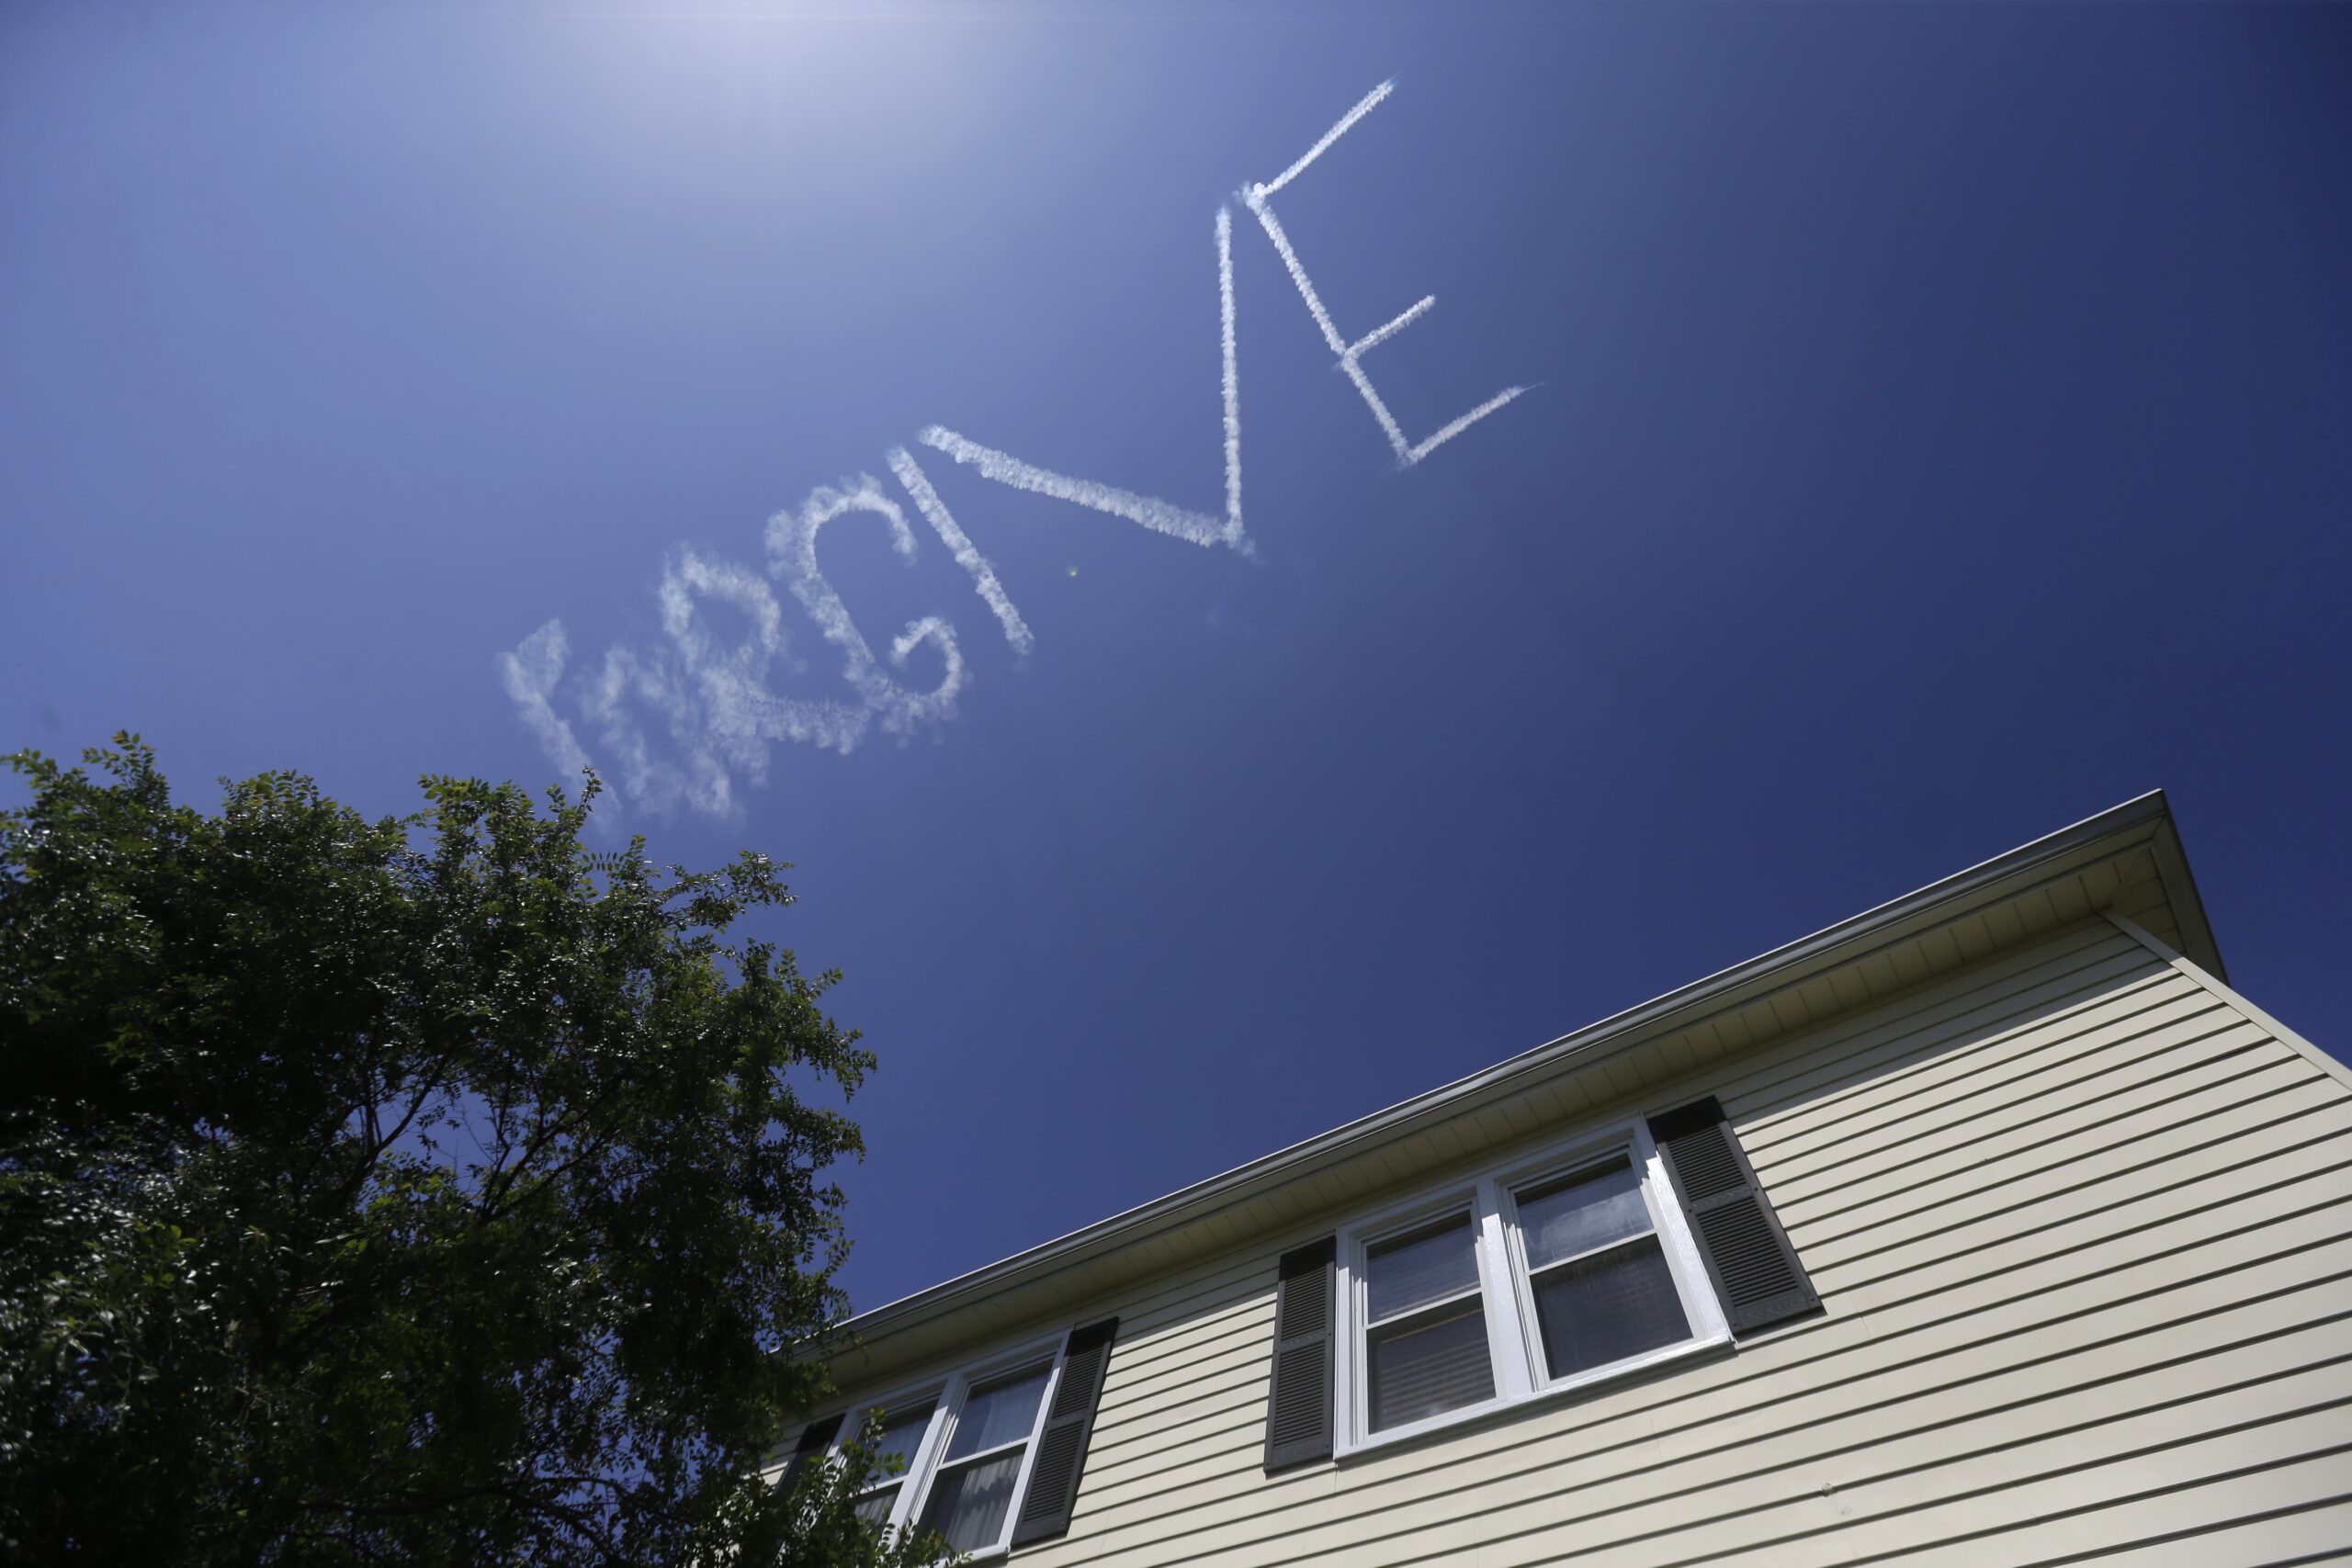 The message "FORGIVE," made by a skywriter, floats above a home in New Orleans.